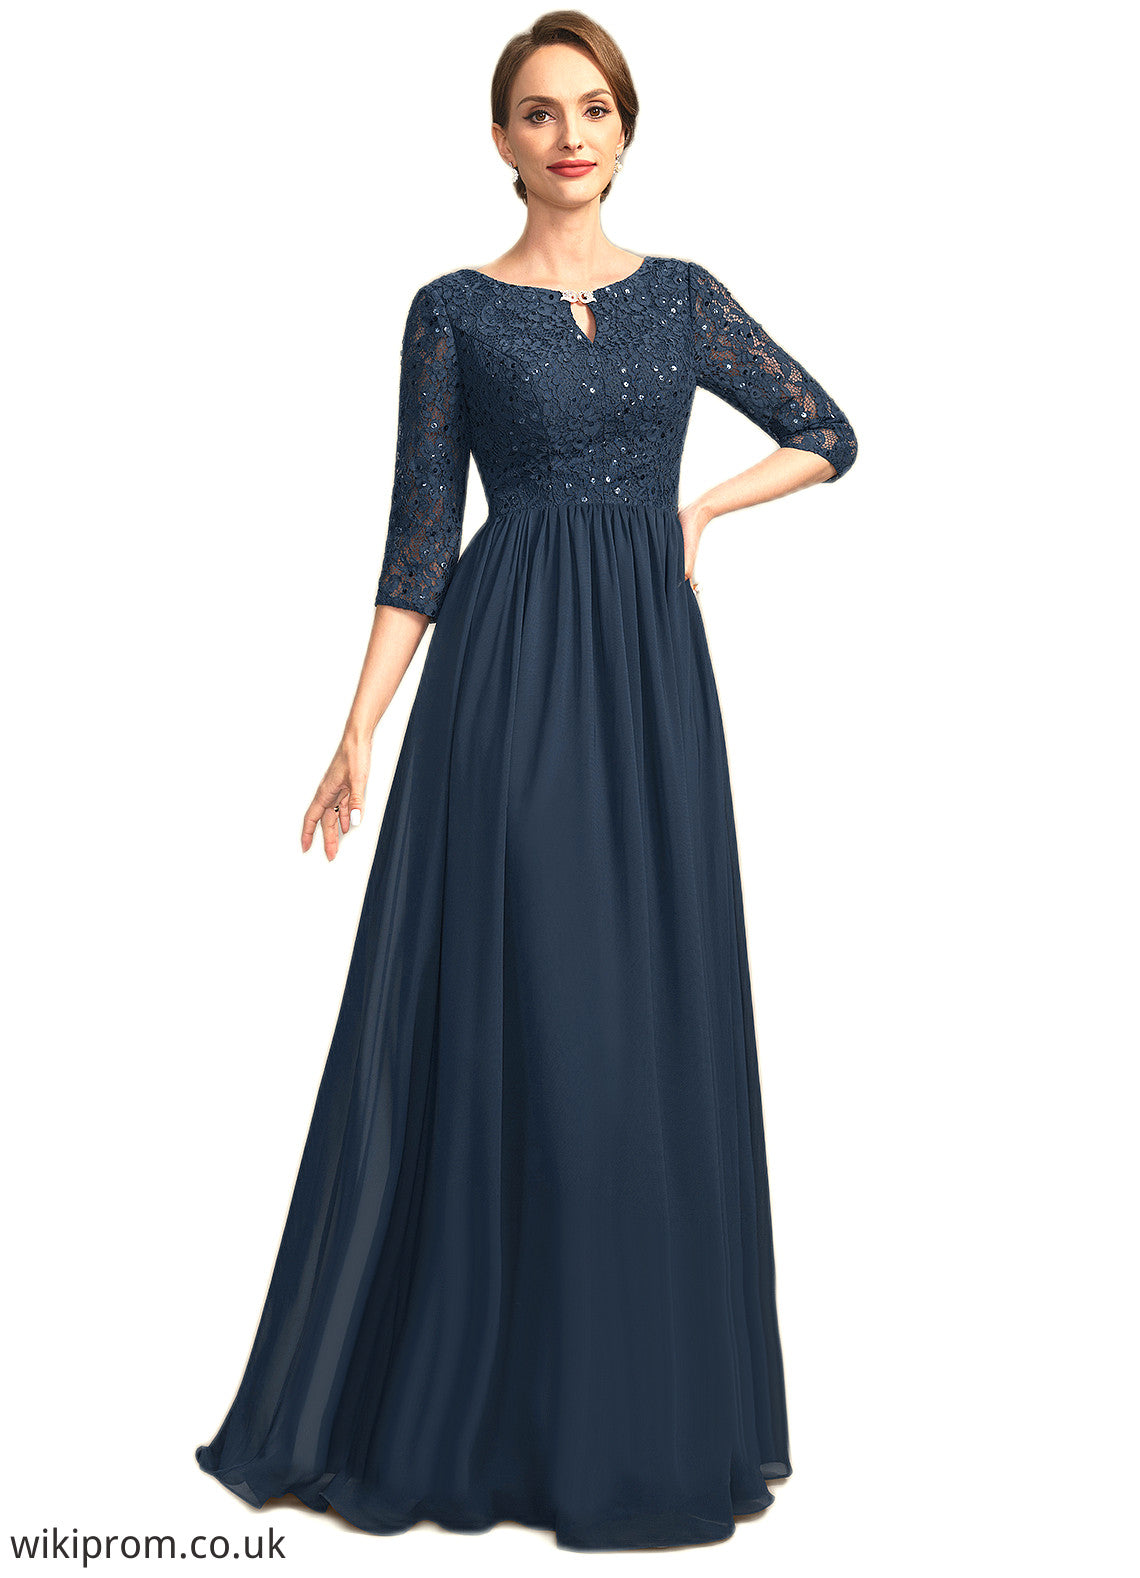 Nora A-line Scoop Floor-Length Chiffon Lace Mother of the Bride Dress With Crystal Brooch Sequins SWK126P0021961